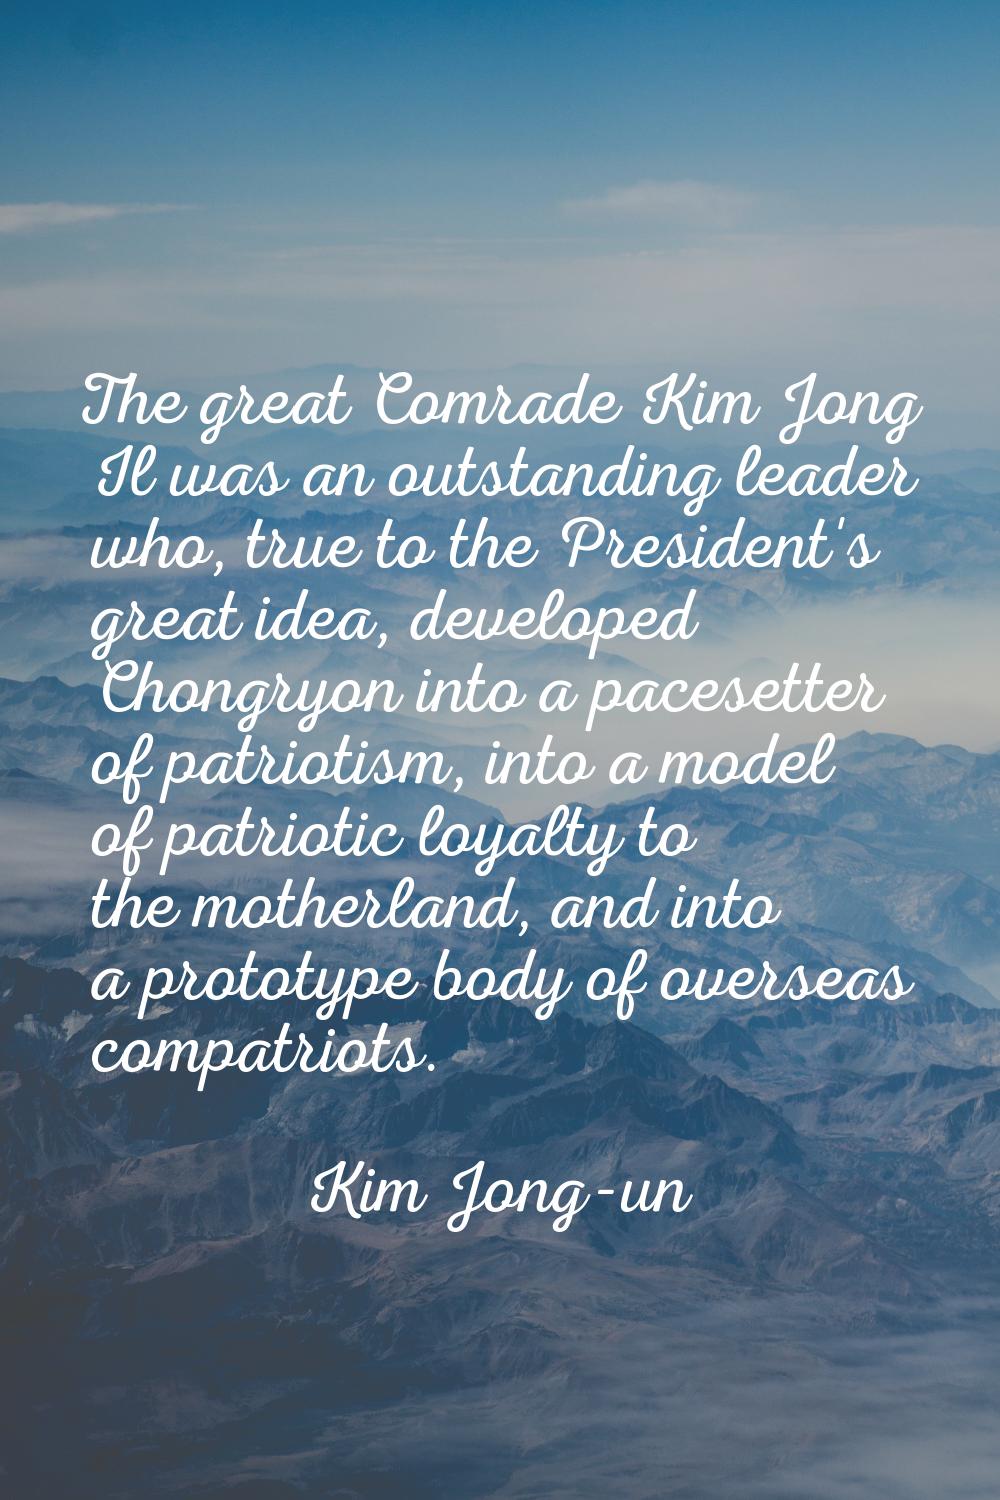 The great Comrade Kim Jong Il was an outstanding leader who, true to the President's great idea, de